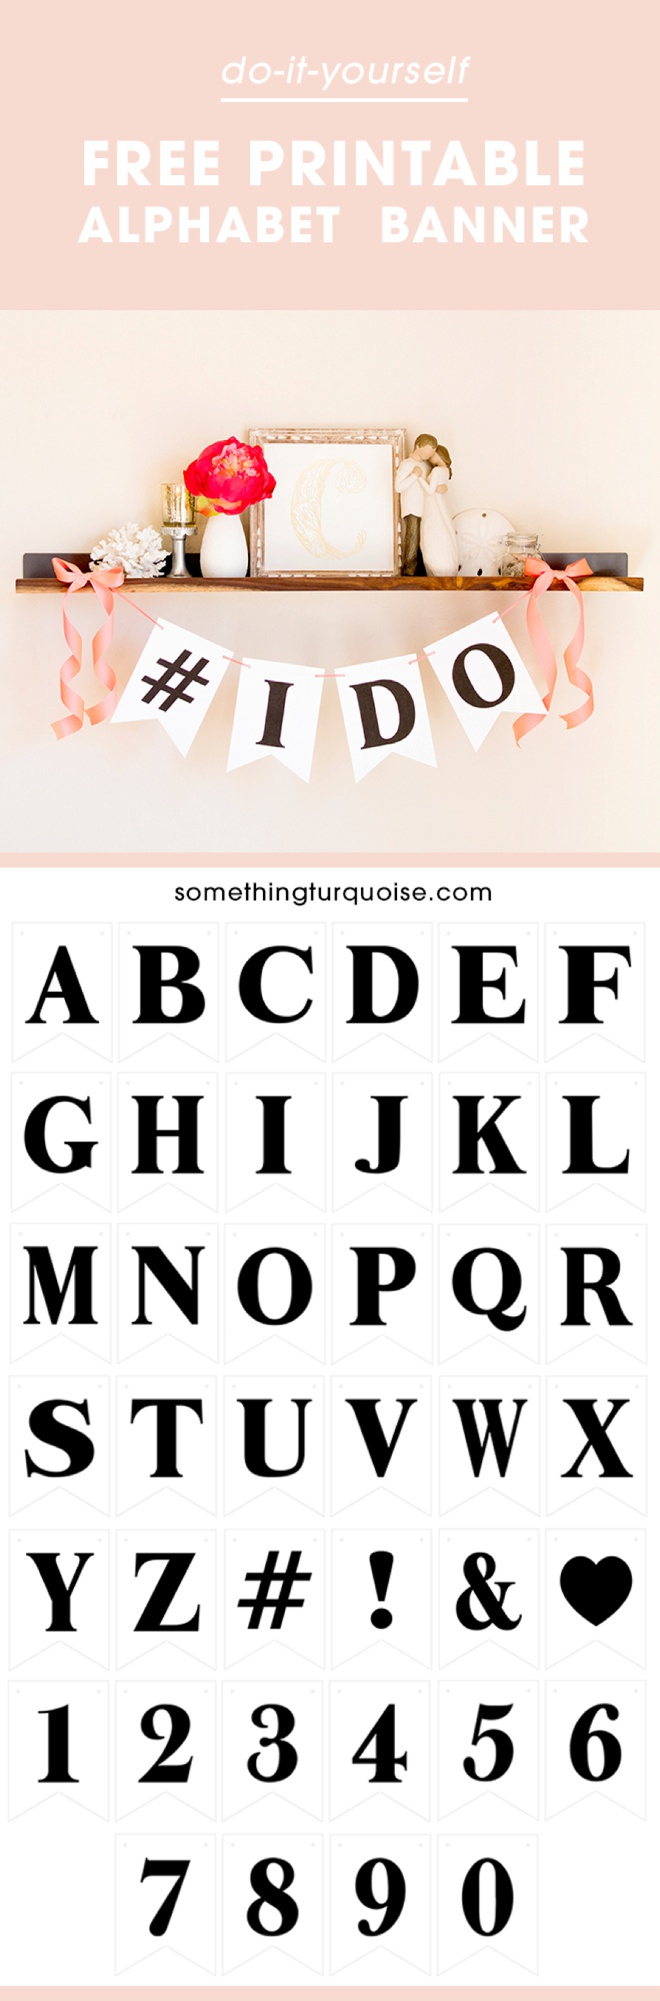 Free Printable Alphabet And Number Banner! Adorable! for Free Printable Abc Banner